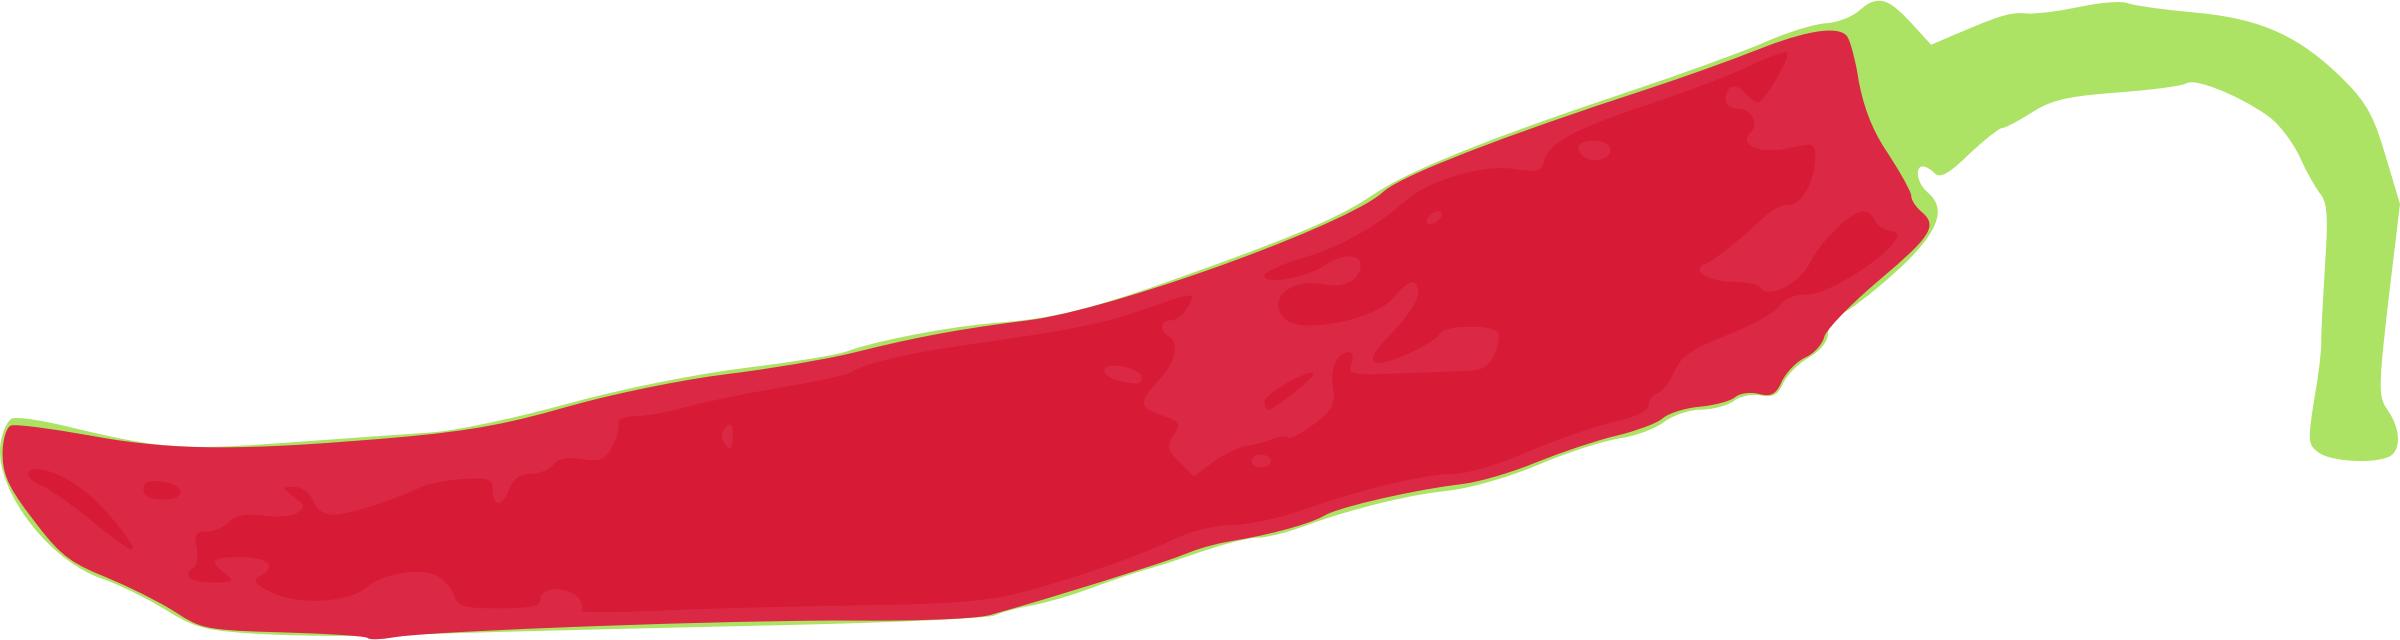 Red Pepper 1 PNG icons